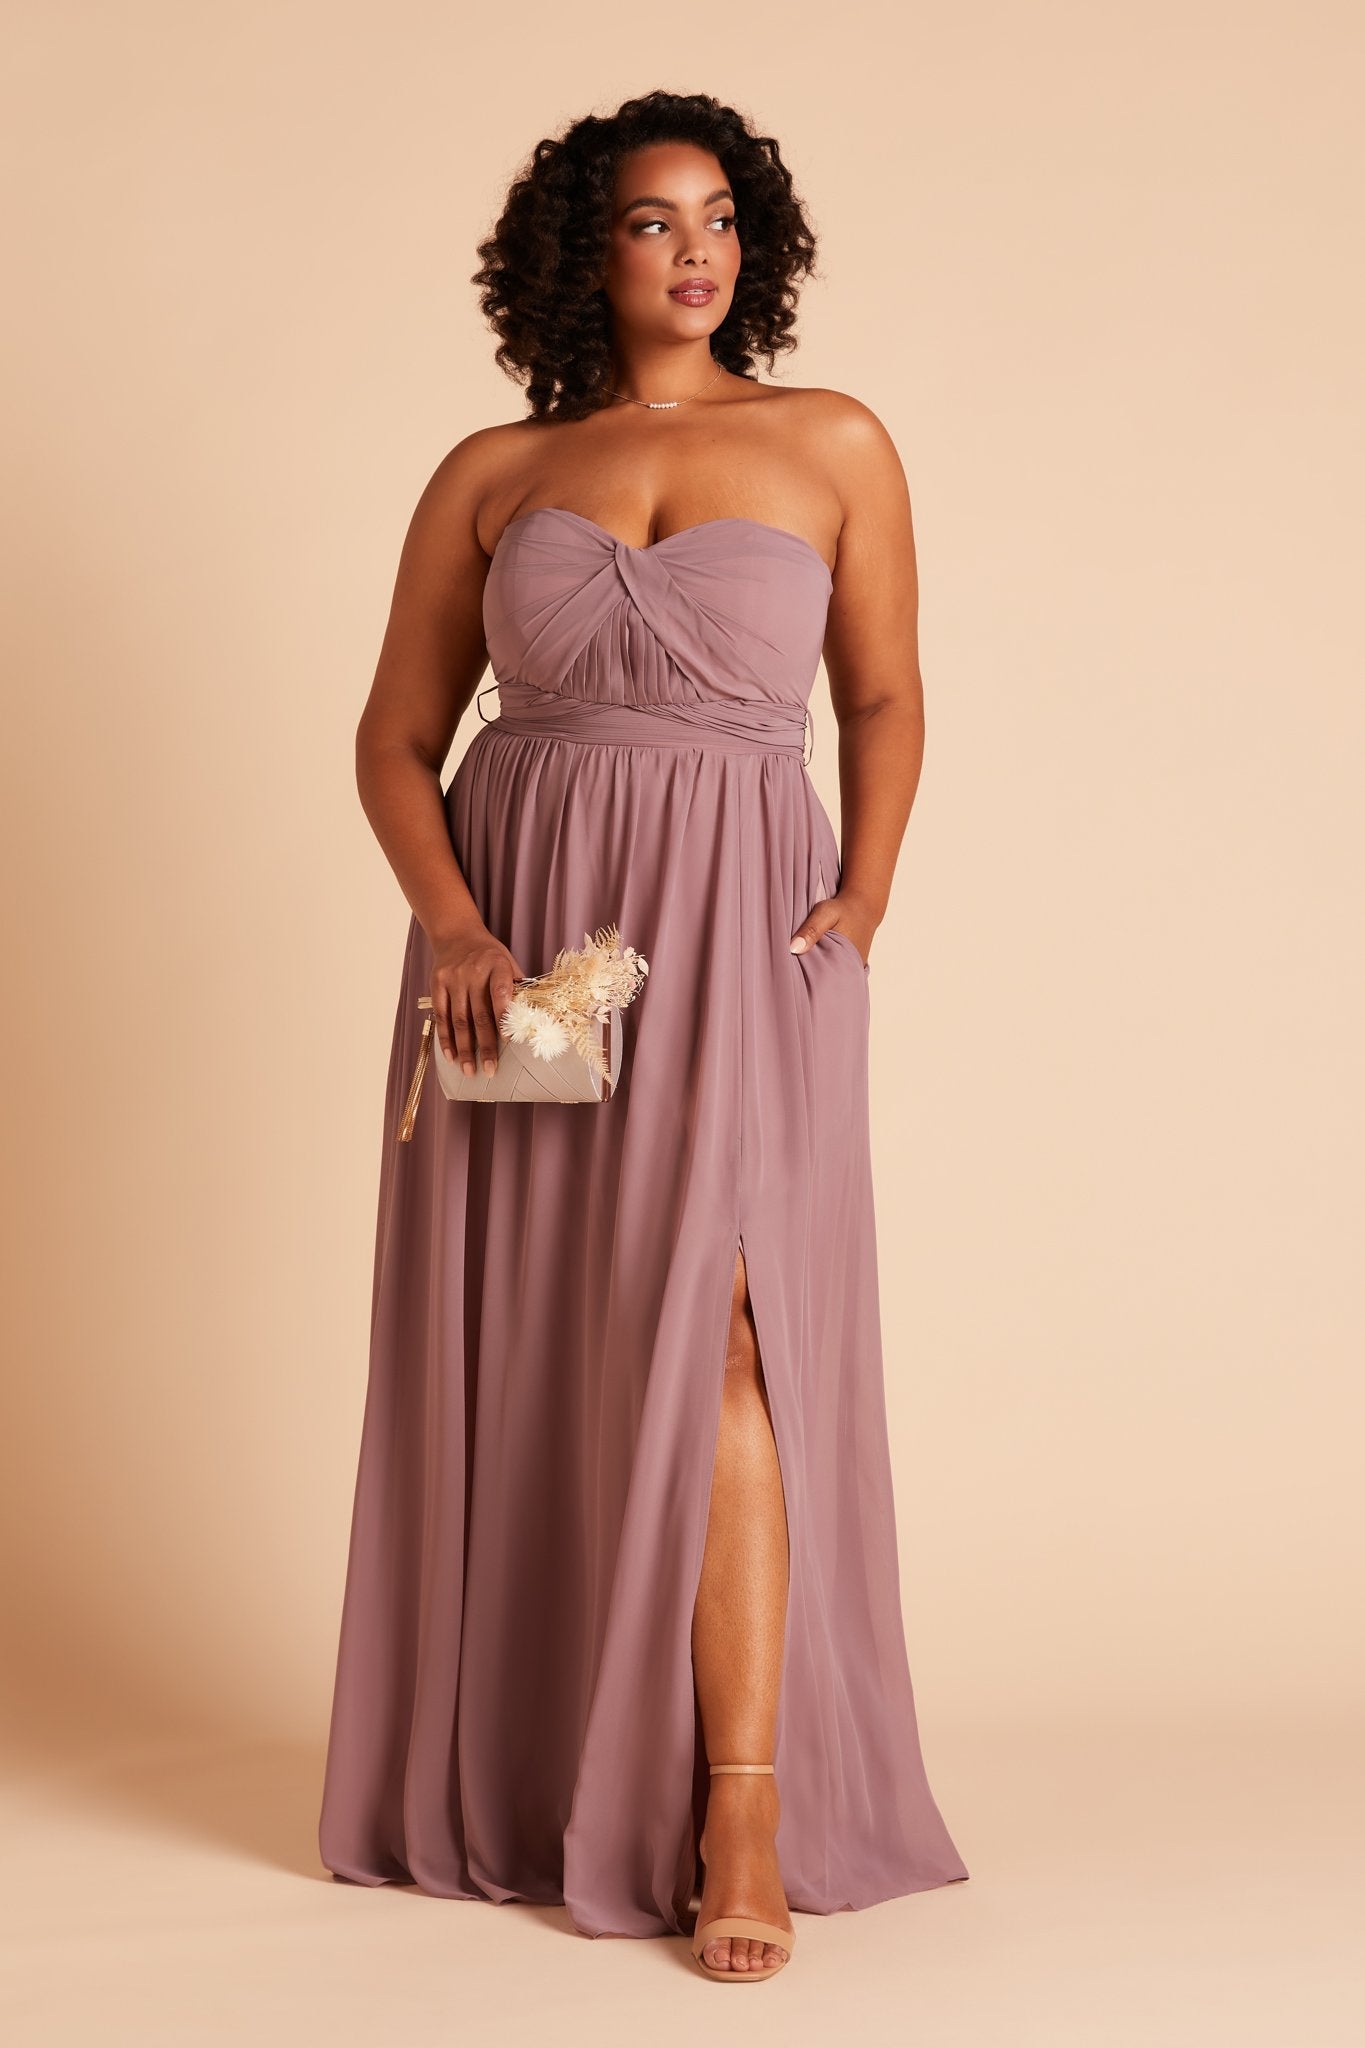 Grace convertible plus size bridesmaid dress with slit in dark mauve chiffon by Birdy Grey, front view with hand in pocket